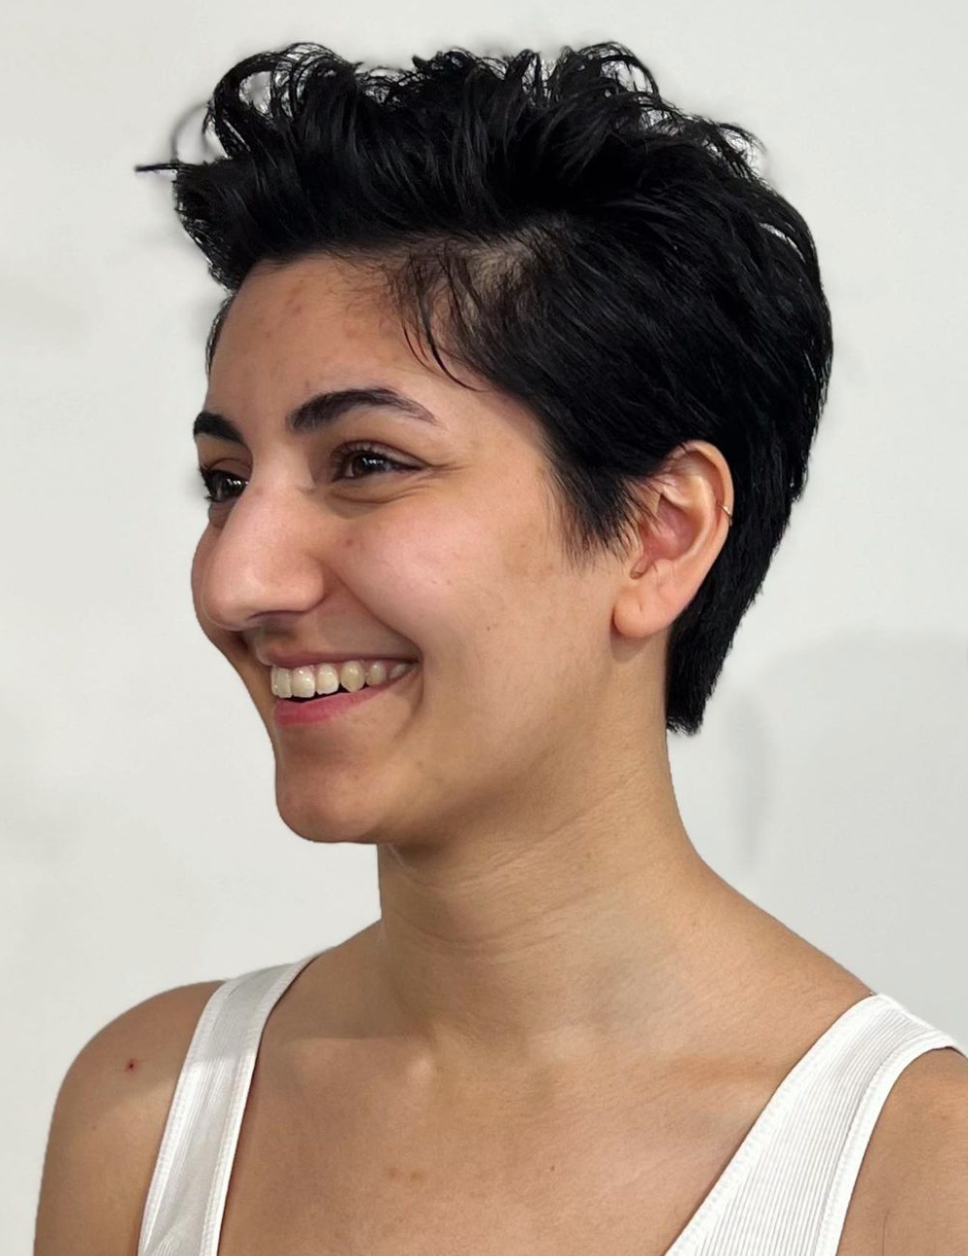 A smiling woman with short black hair looks off to the side. 